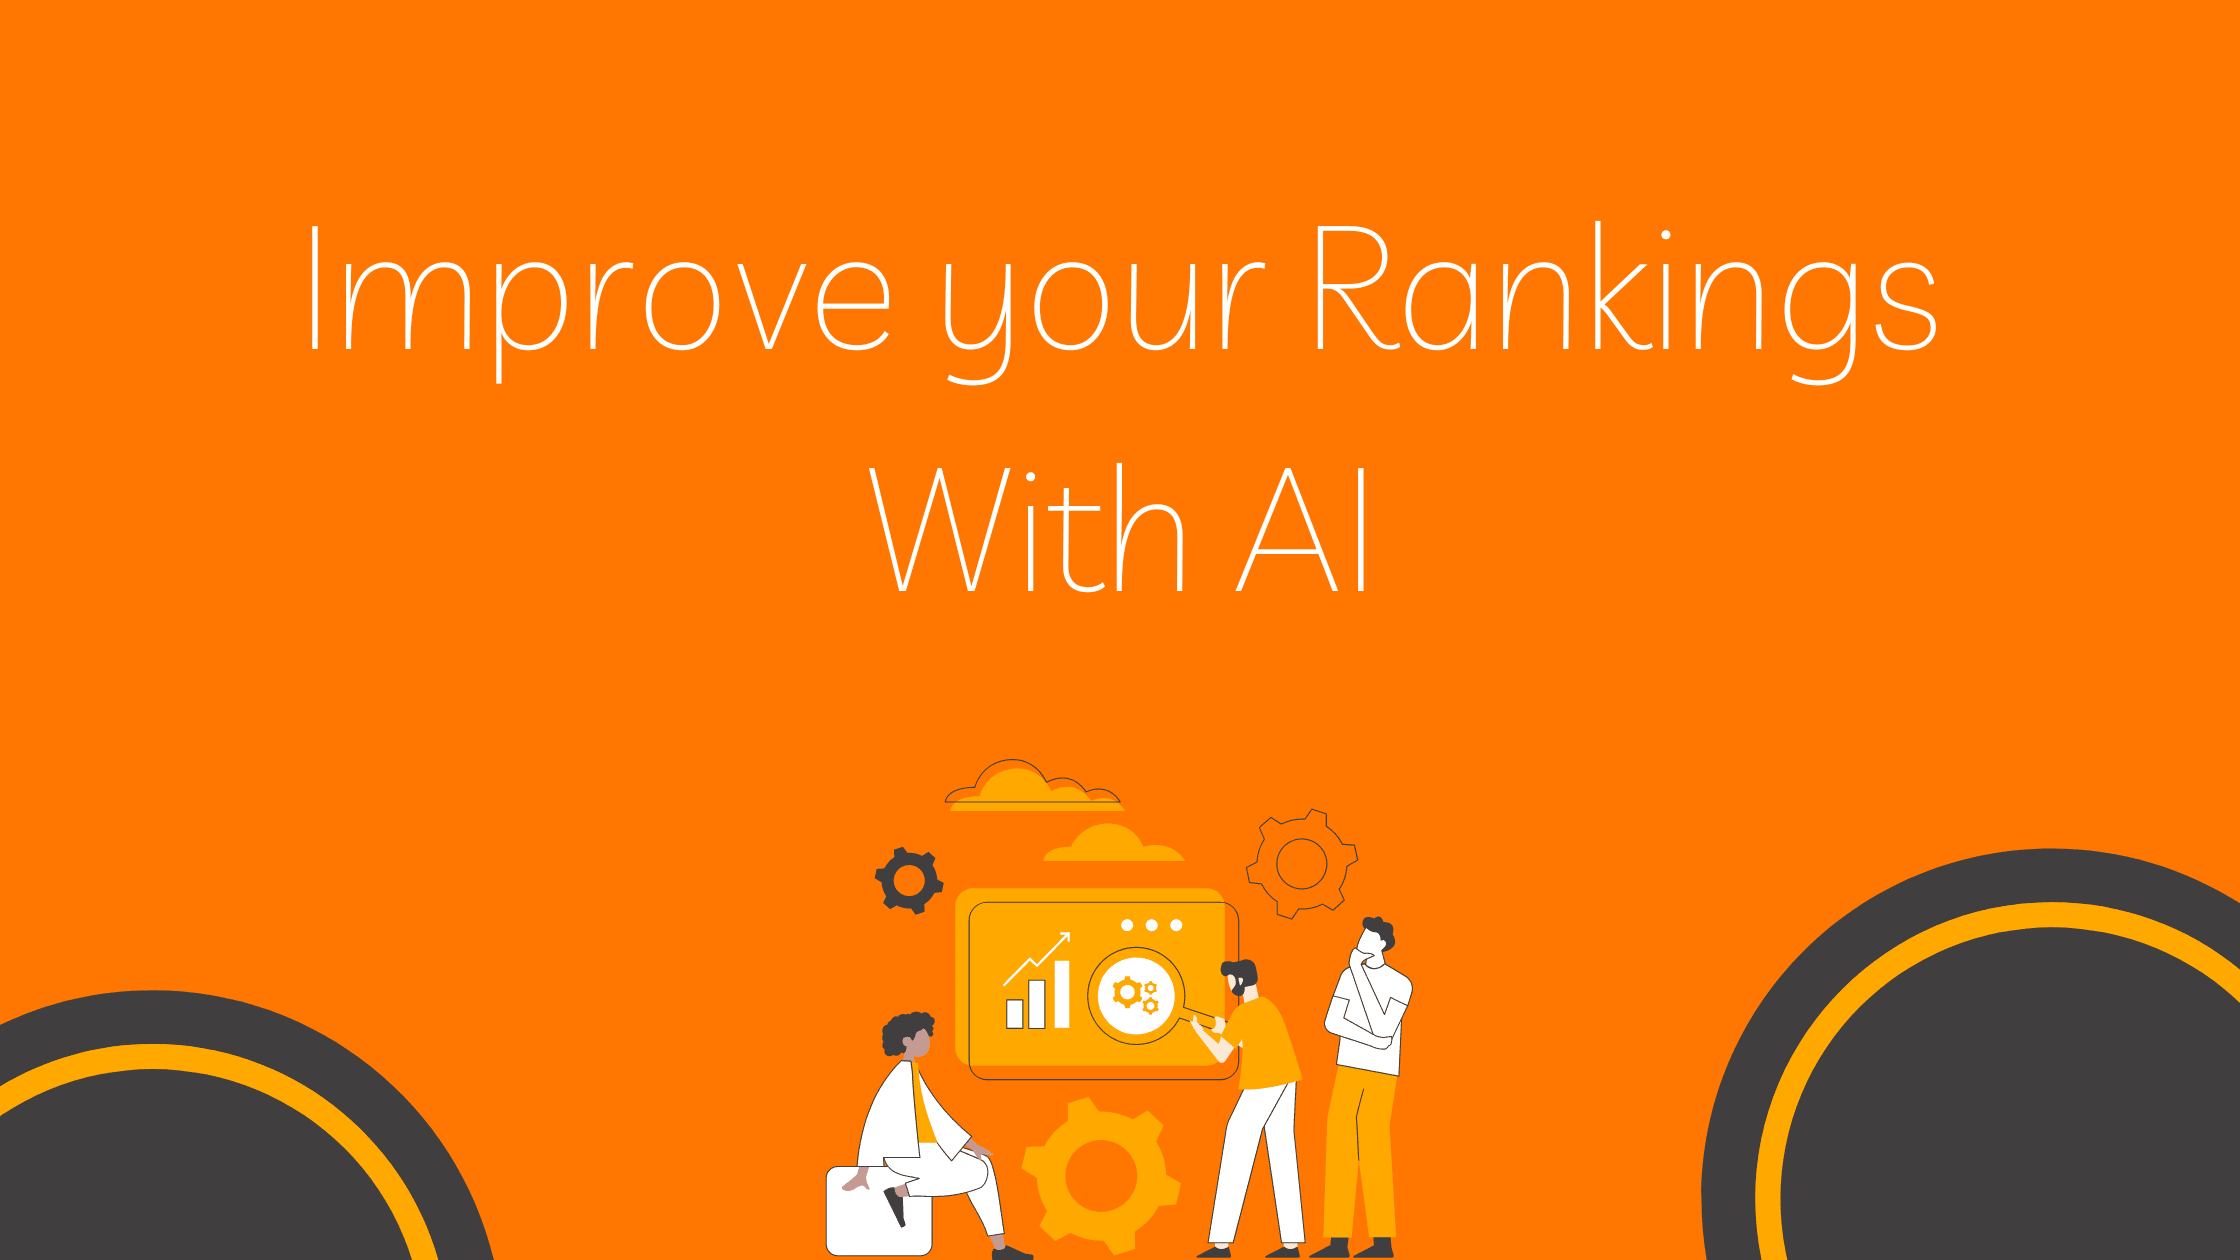 Improve your Rankings With AI